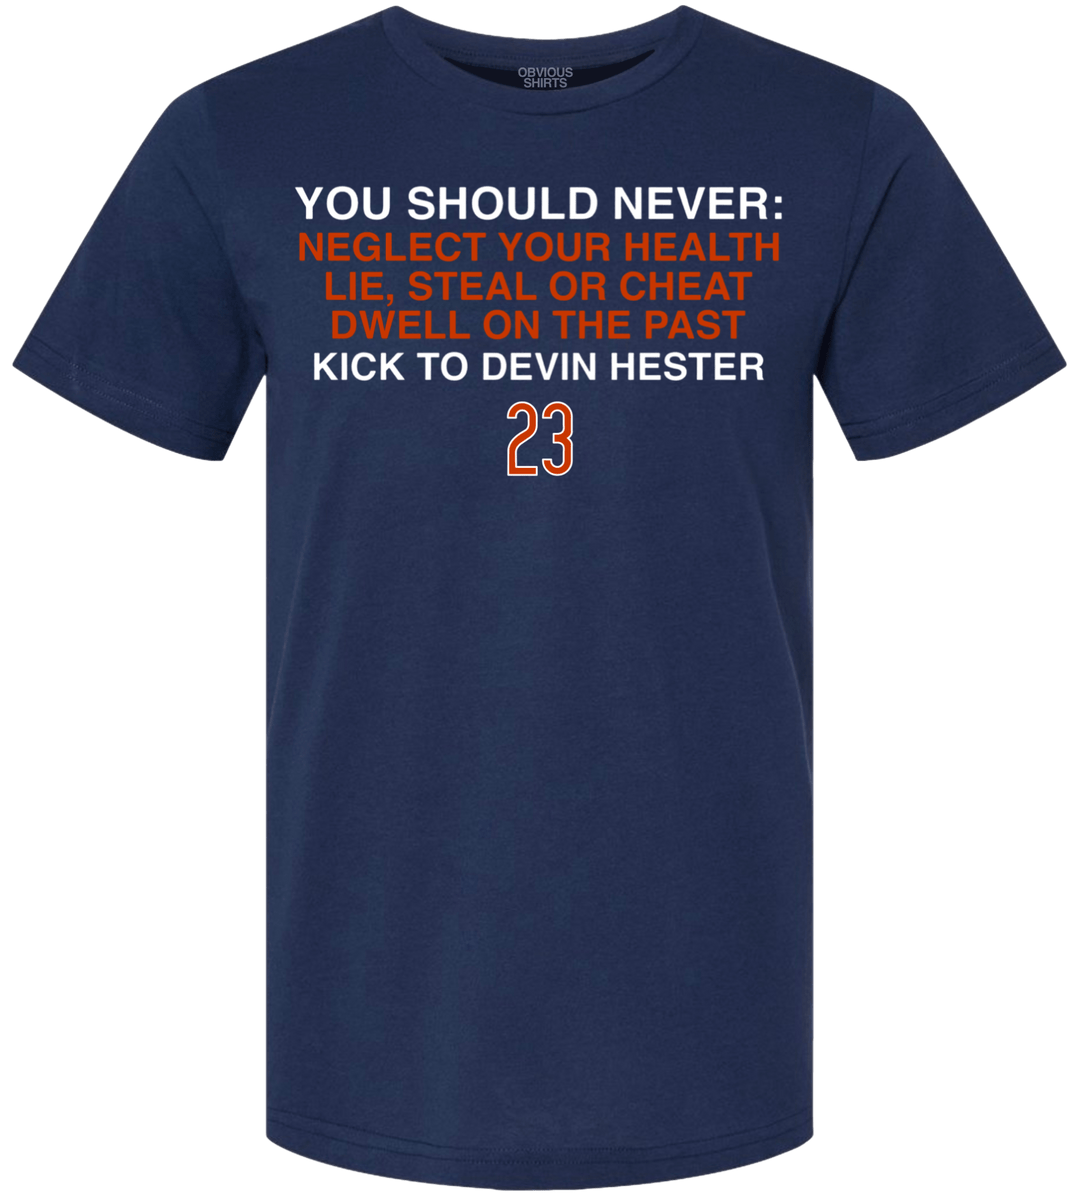 NEVER KICK TO DEVIN HESTER. - OBVIOUS SHIRTS